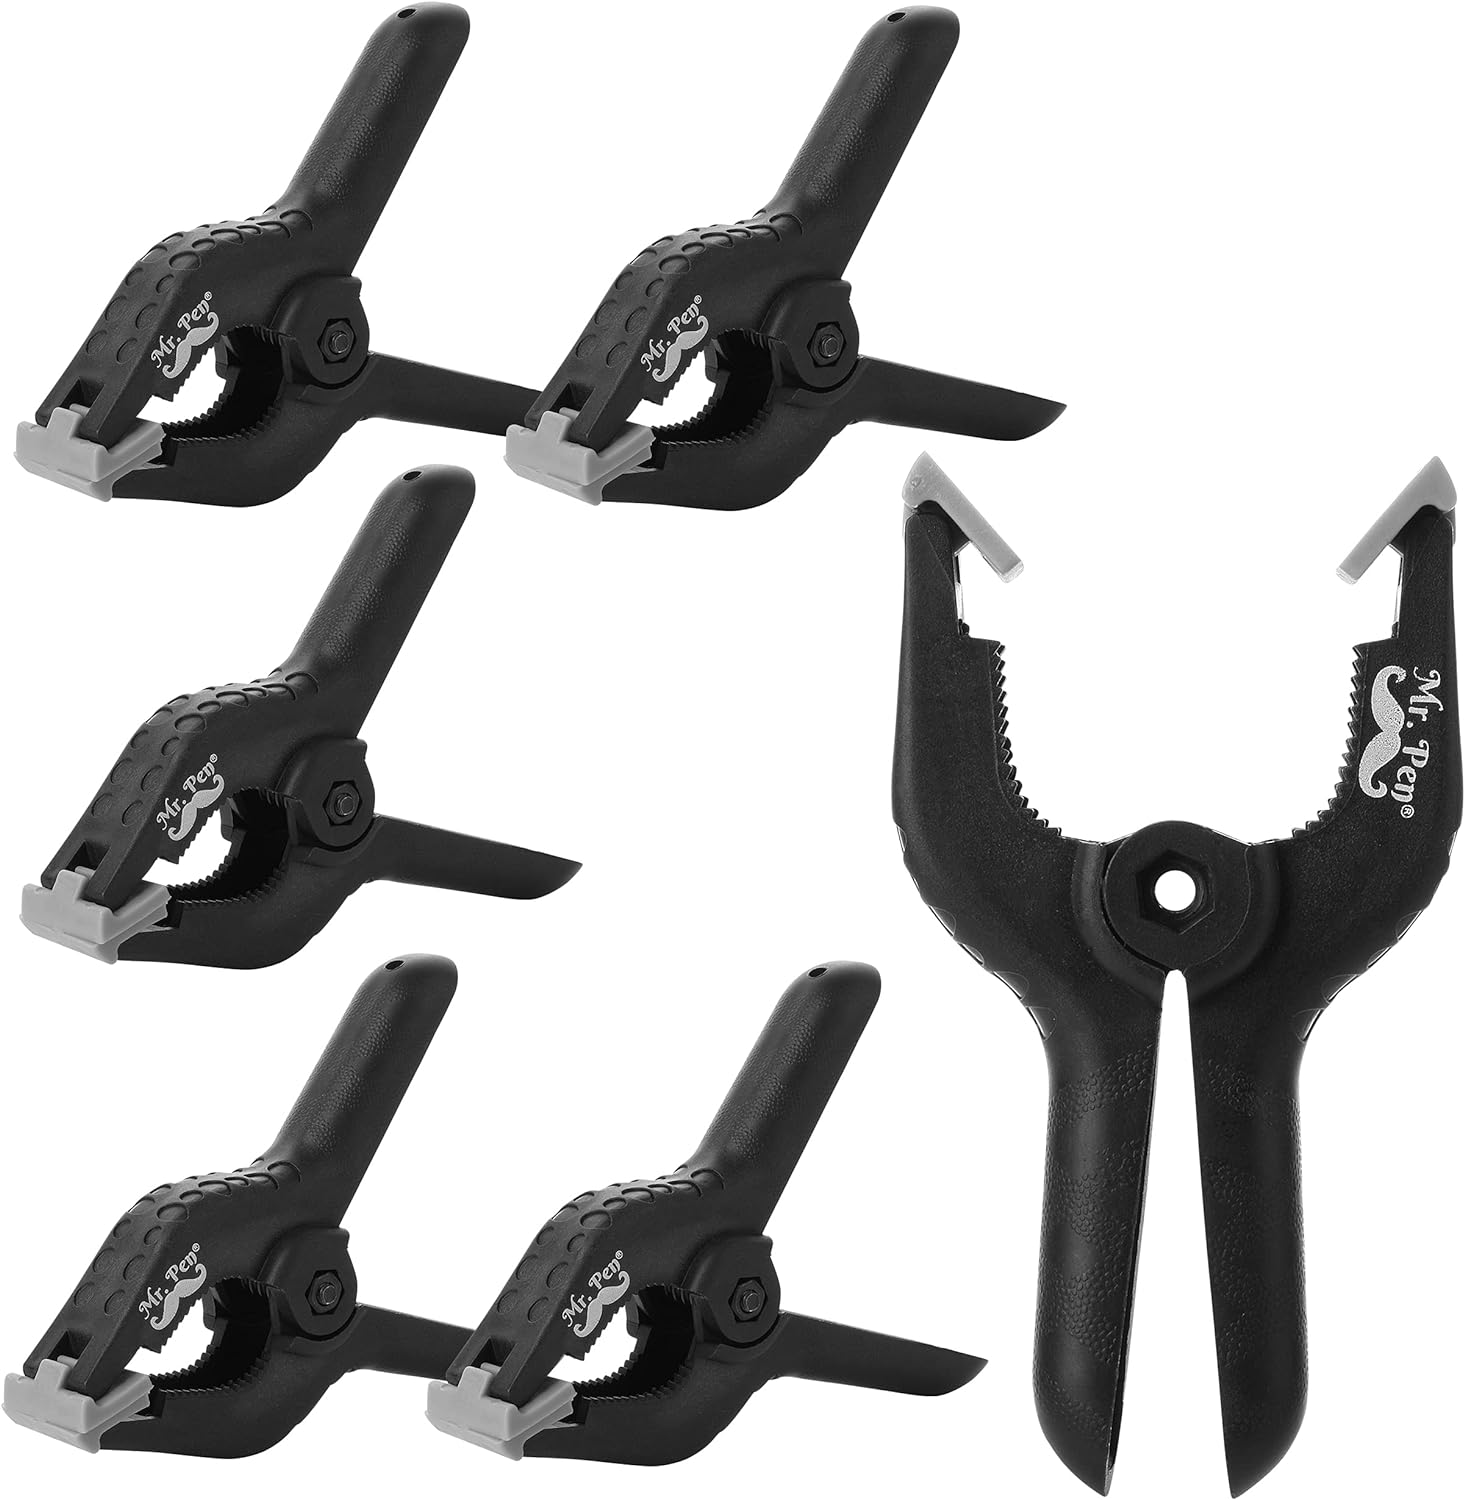 Mr. Pen - Spring Clamps, 6 Pack, 4.5 Inch, Plastic Clamps, Backdrop Clamps,  Clamps Set, Clamps for Crafts, Clamps, Clamps for Backdrop